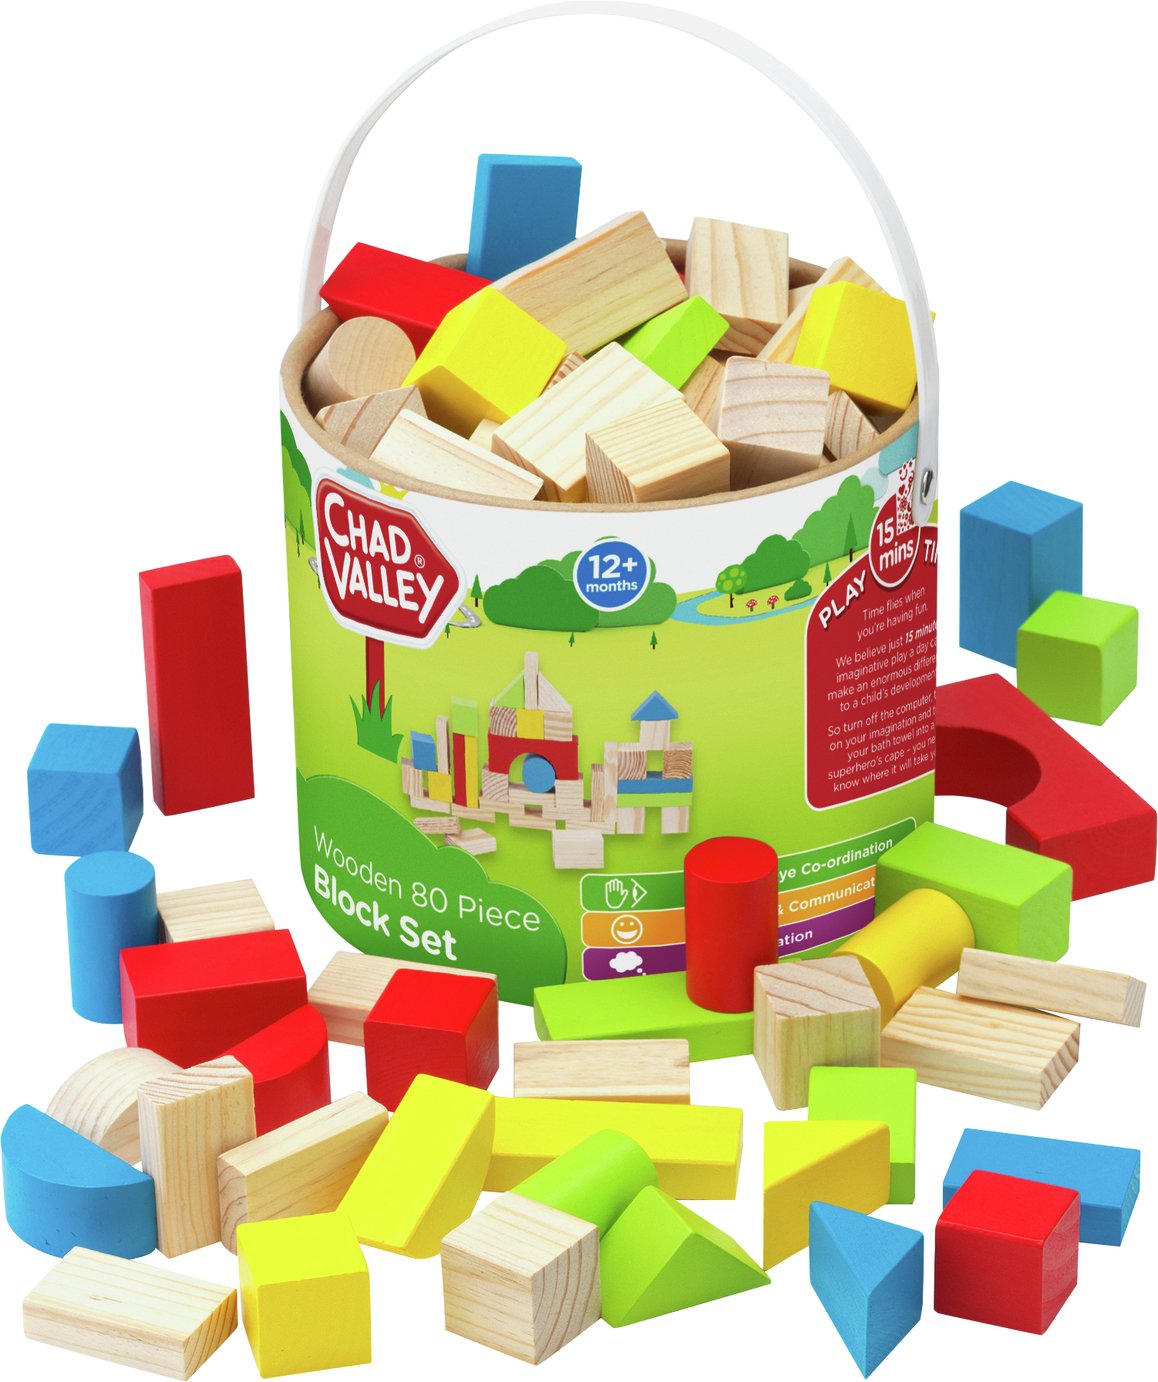 Chad Valley PlaySmart Wooden Block Set Review